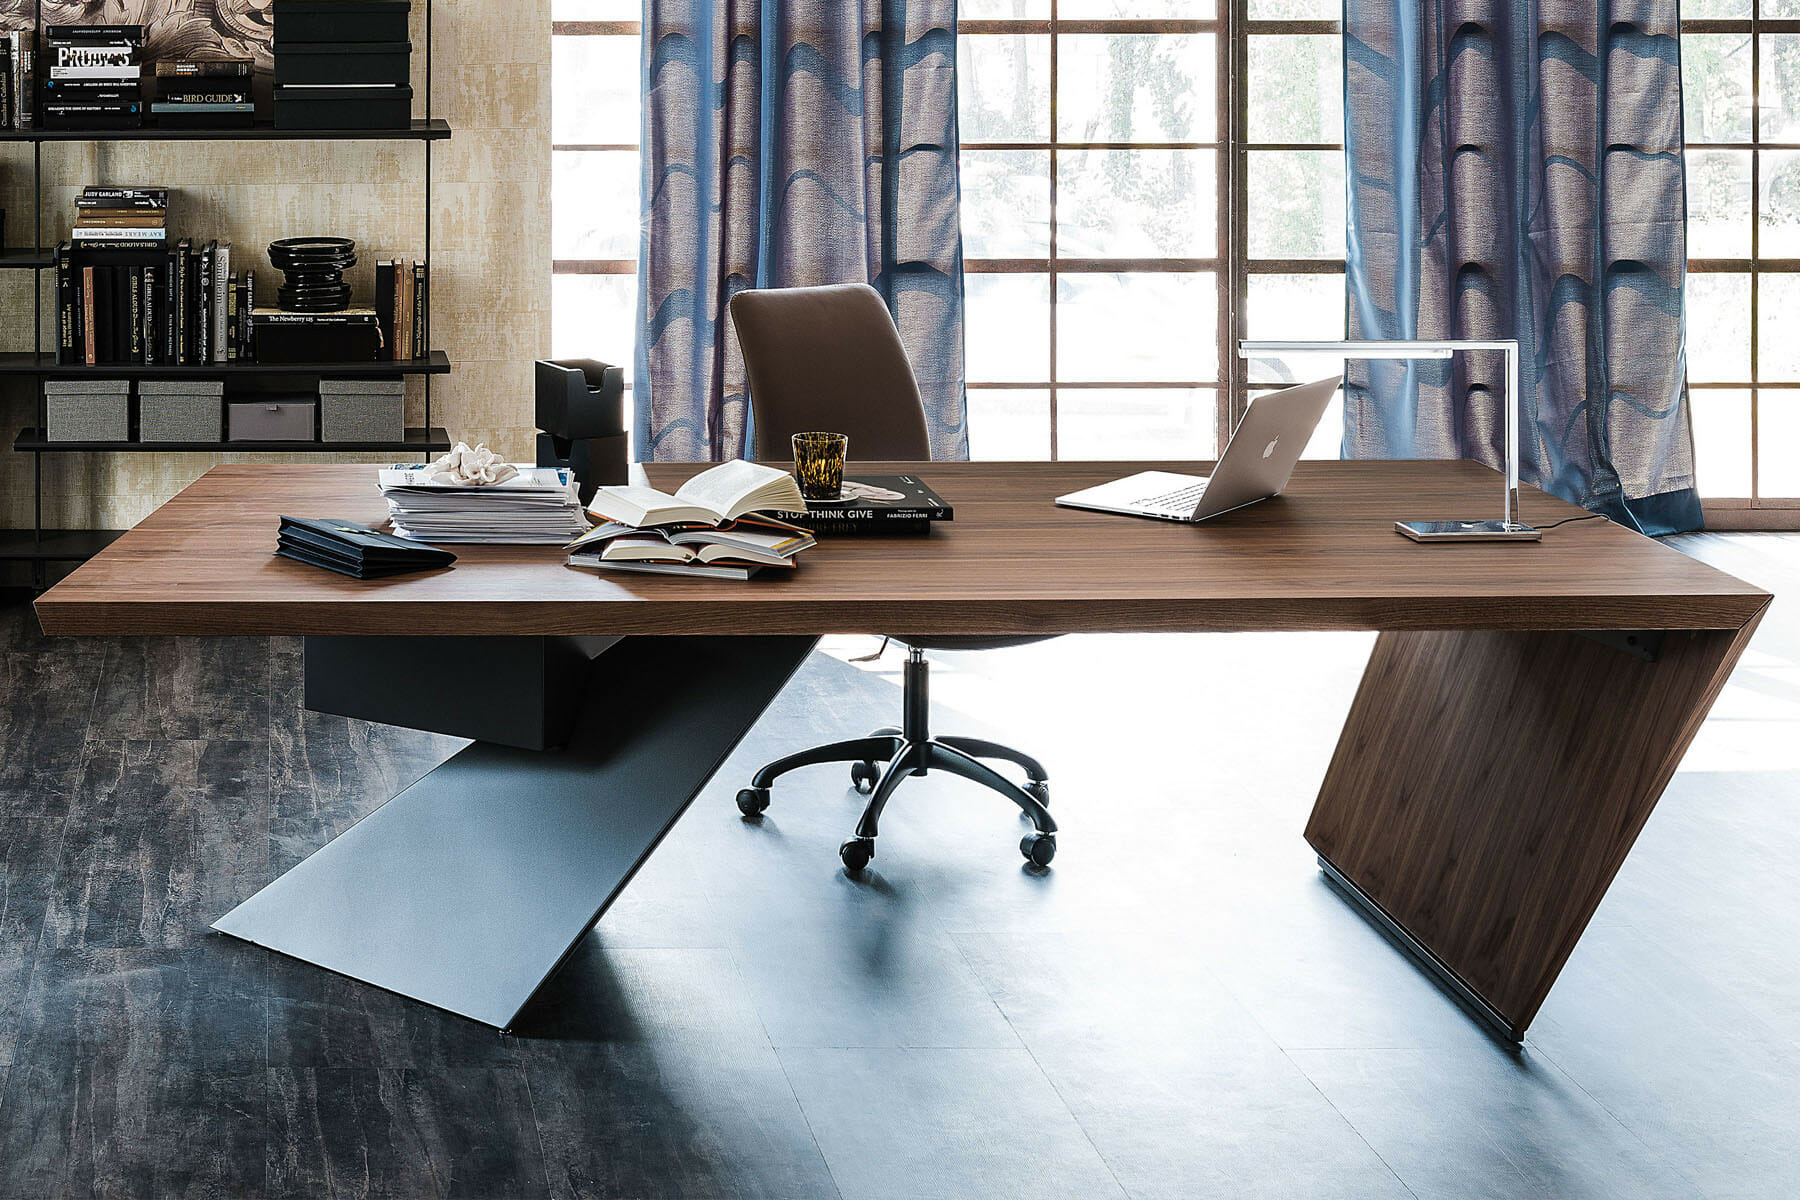 How to Choose Home Office Furniture: Expert Guide to Chairs, Desks & More